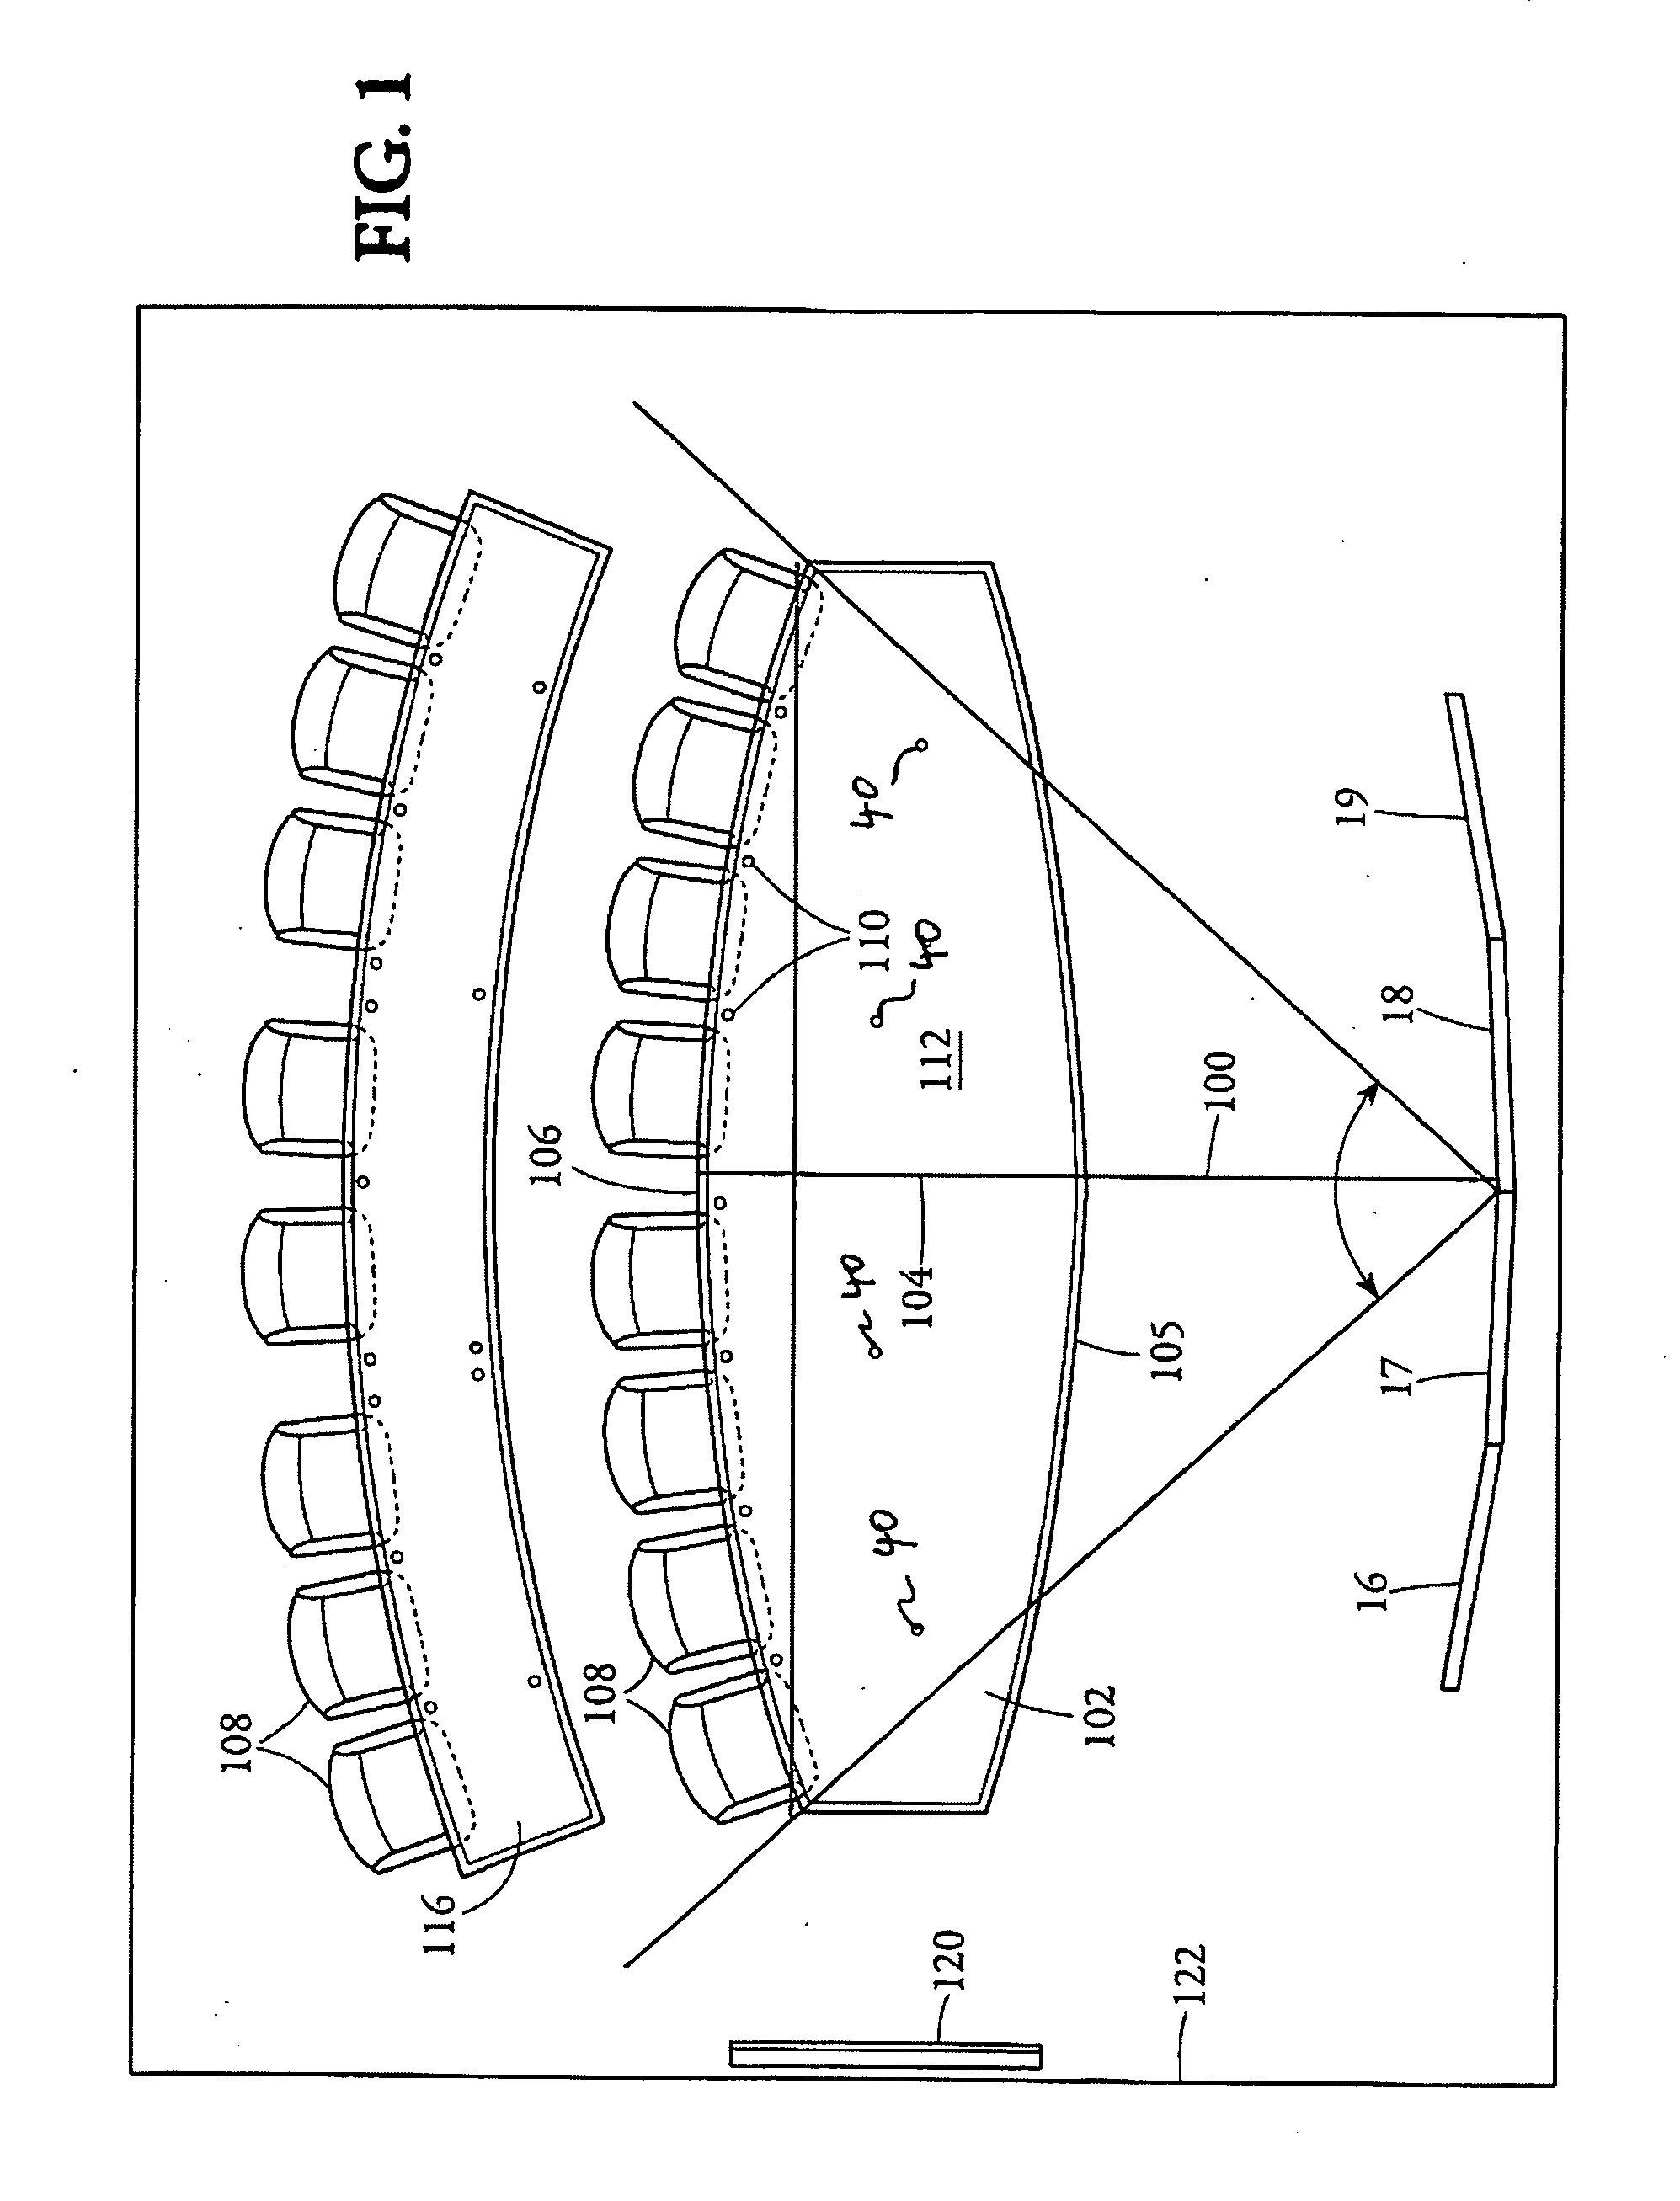 Telepresence conference room layout, dynamic scenario manager, diagnostics and control system and method